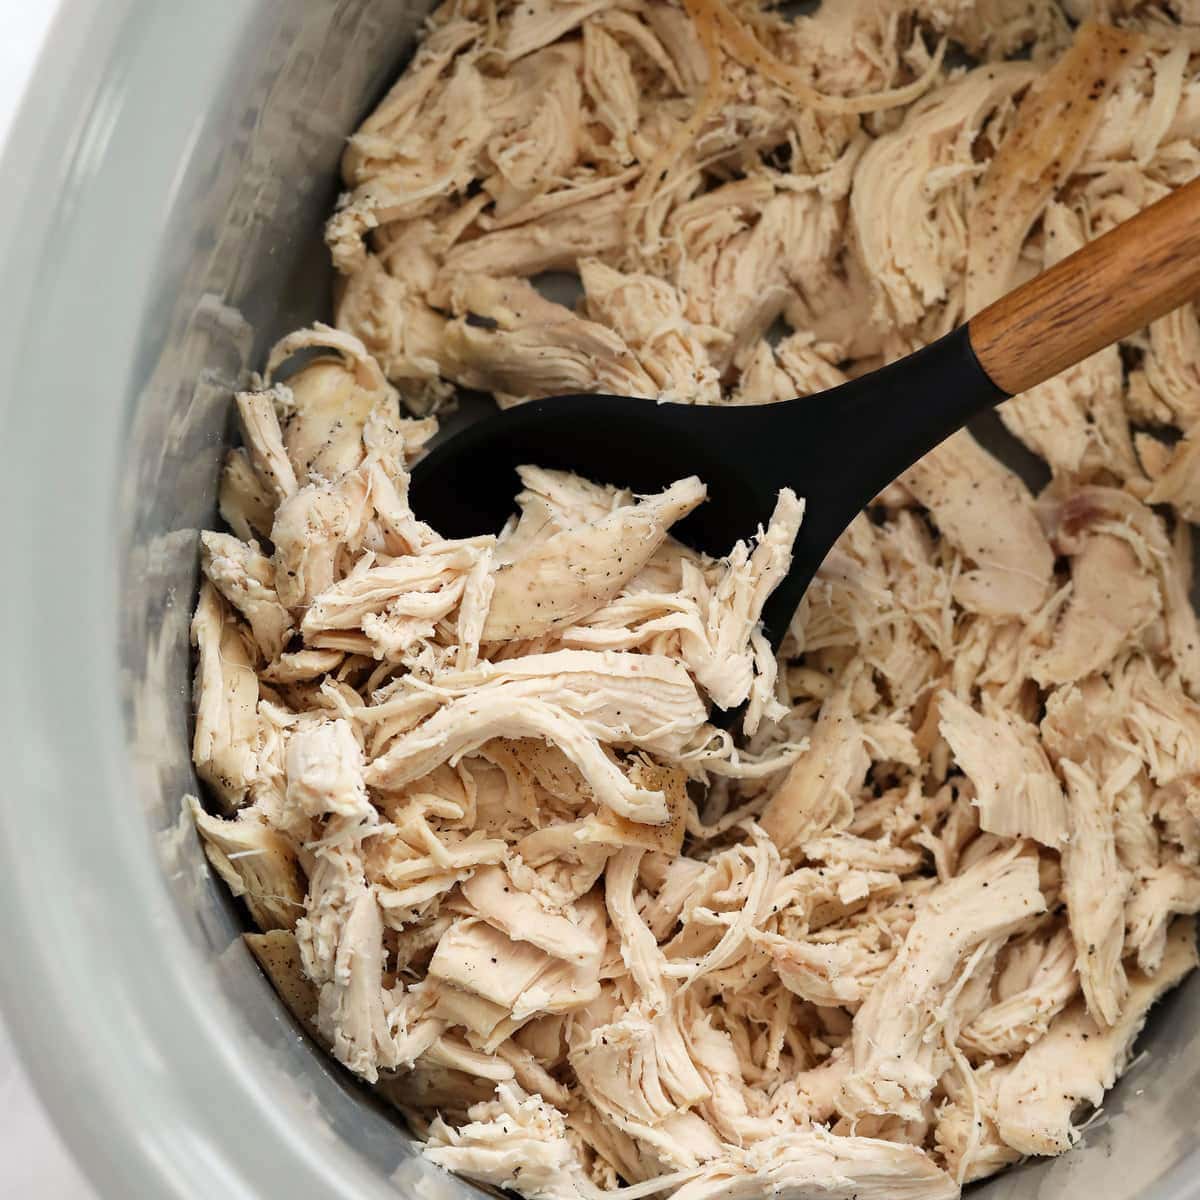 5. Shred the chicken with two forks